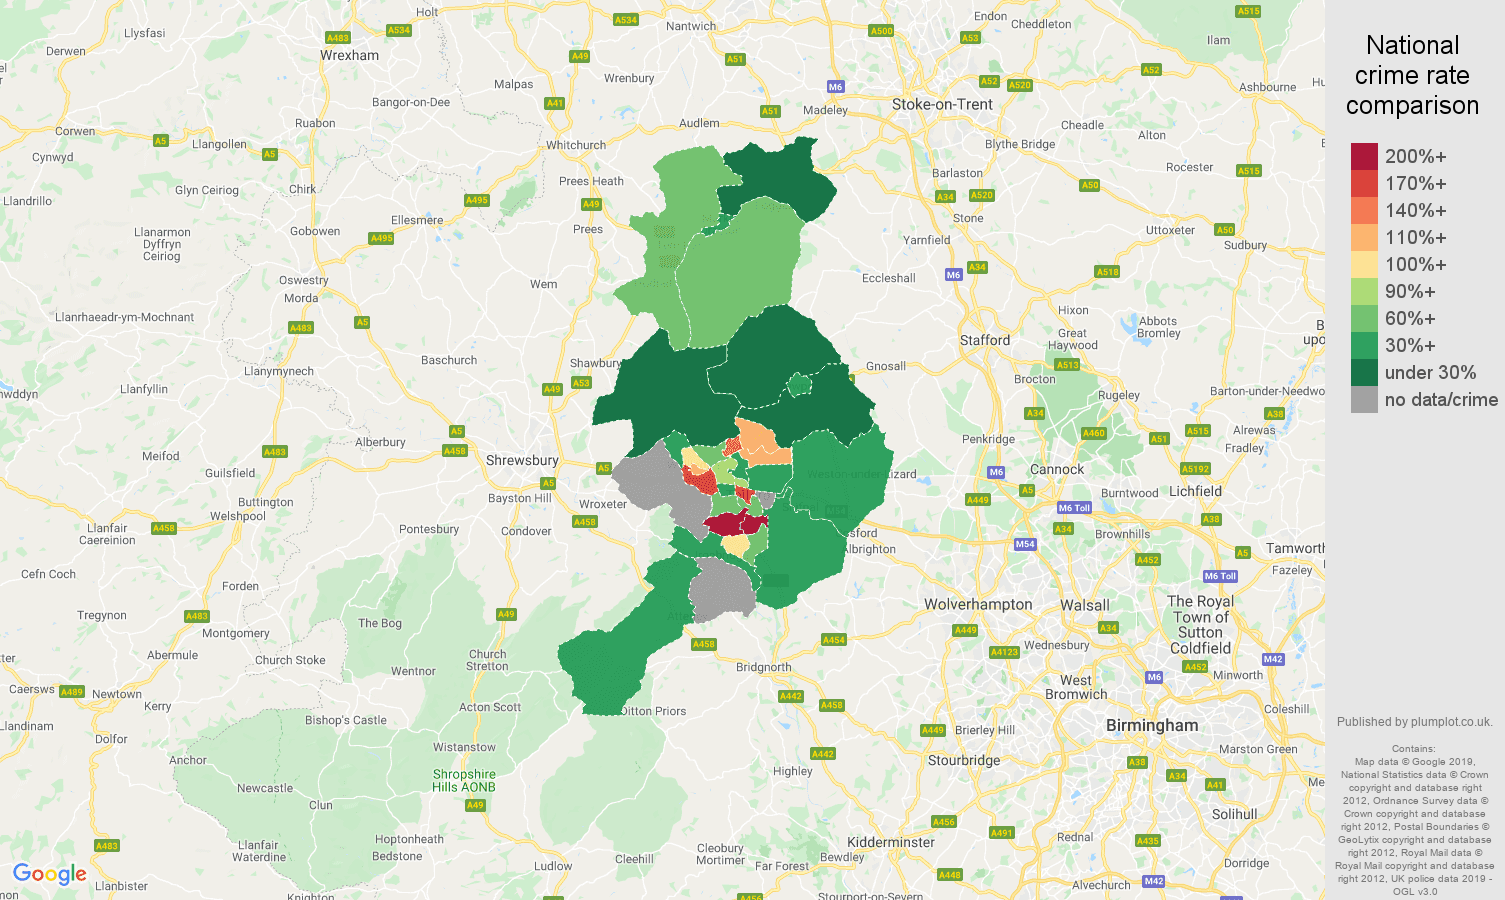 Telford other crime rate comparison map